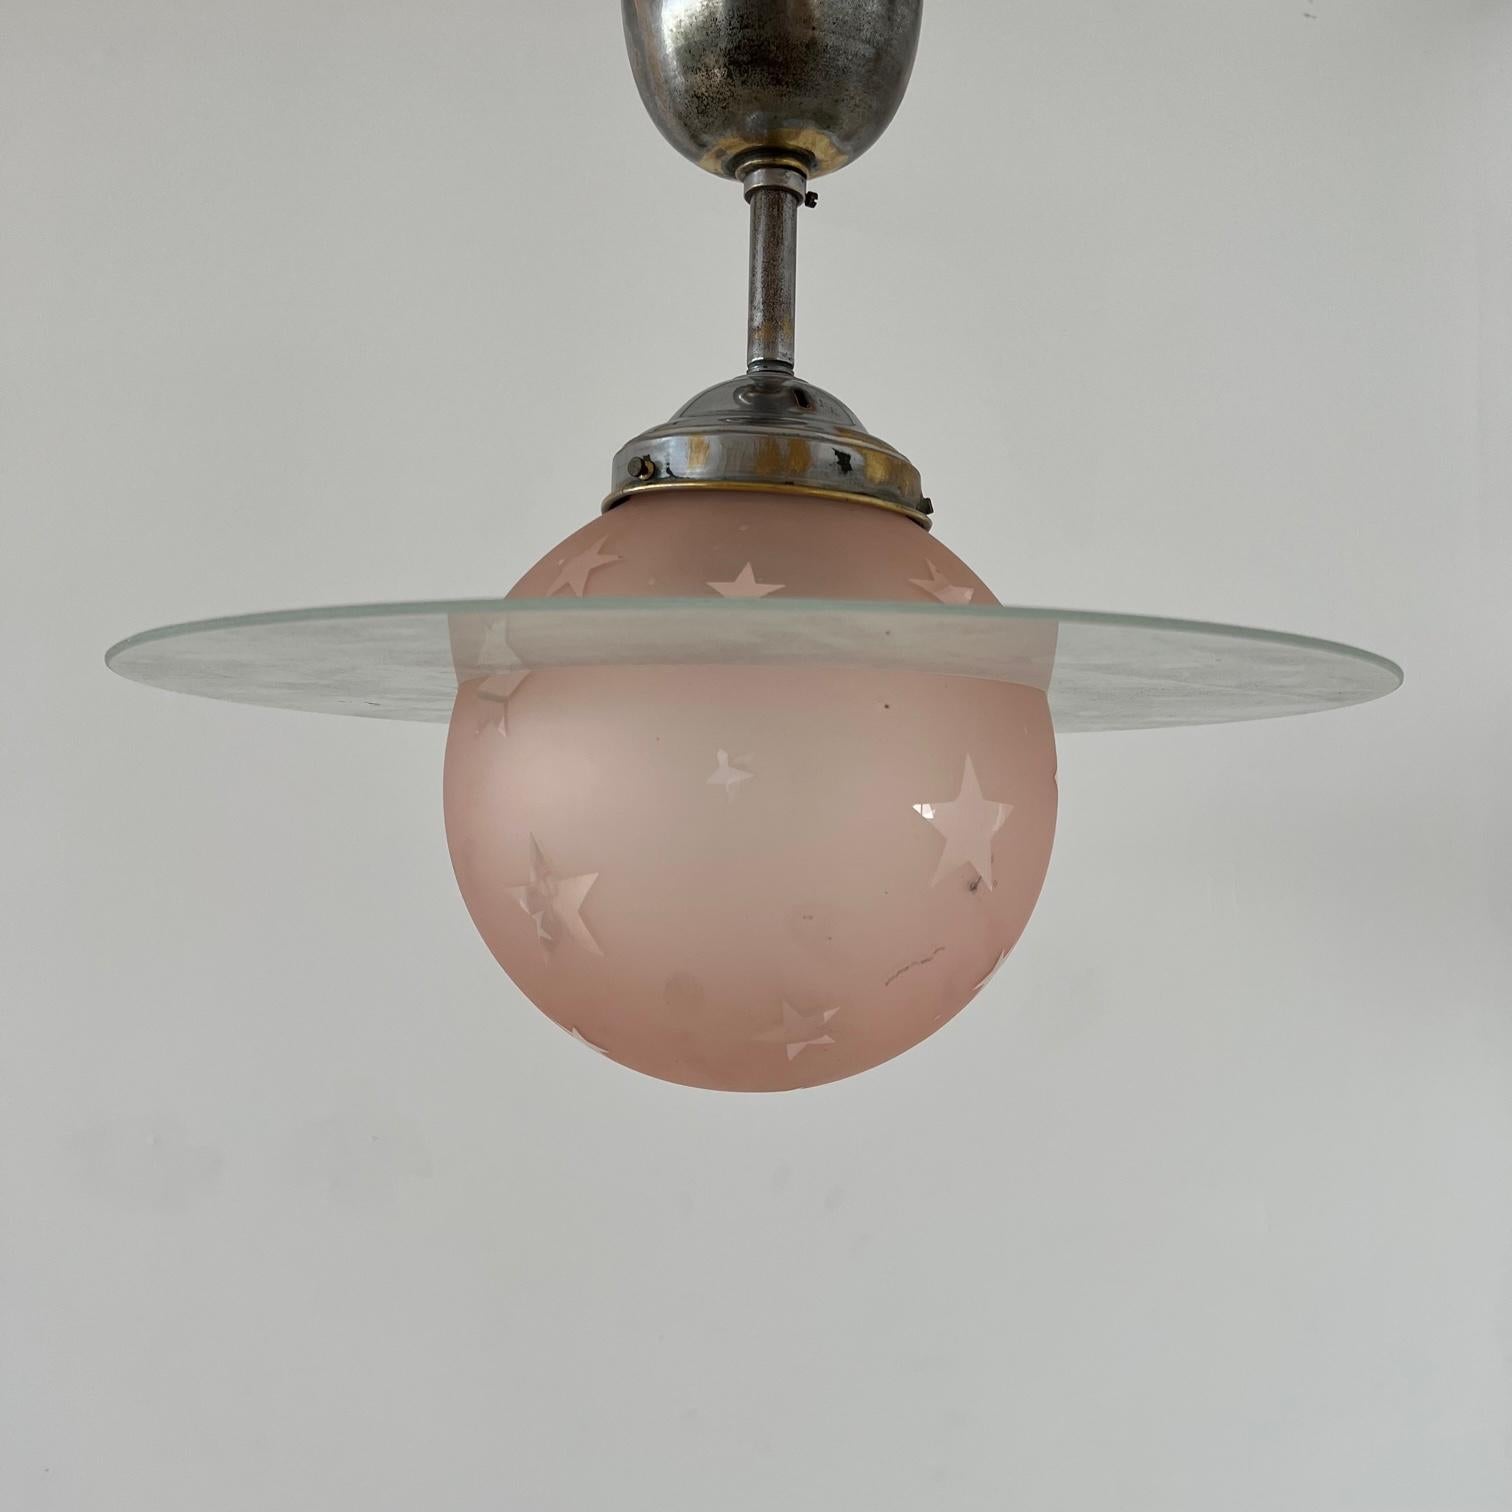 A stylish two tone pendant light. 

France, c1960s. 

The saturn style glass rim sits on top of the glass globe, so it is optional. 

Since re-wired and PAT tested. 

Rod Height: 33cm

Location: Belgium Gallery. 

Dimensions: 84 H x 36 W